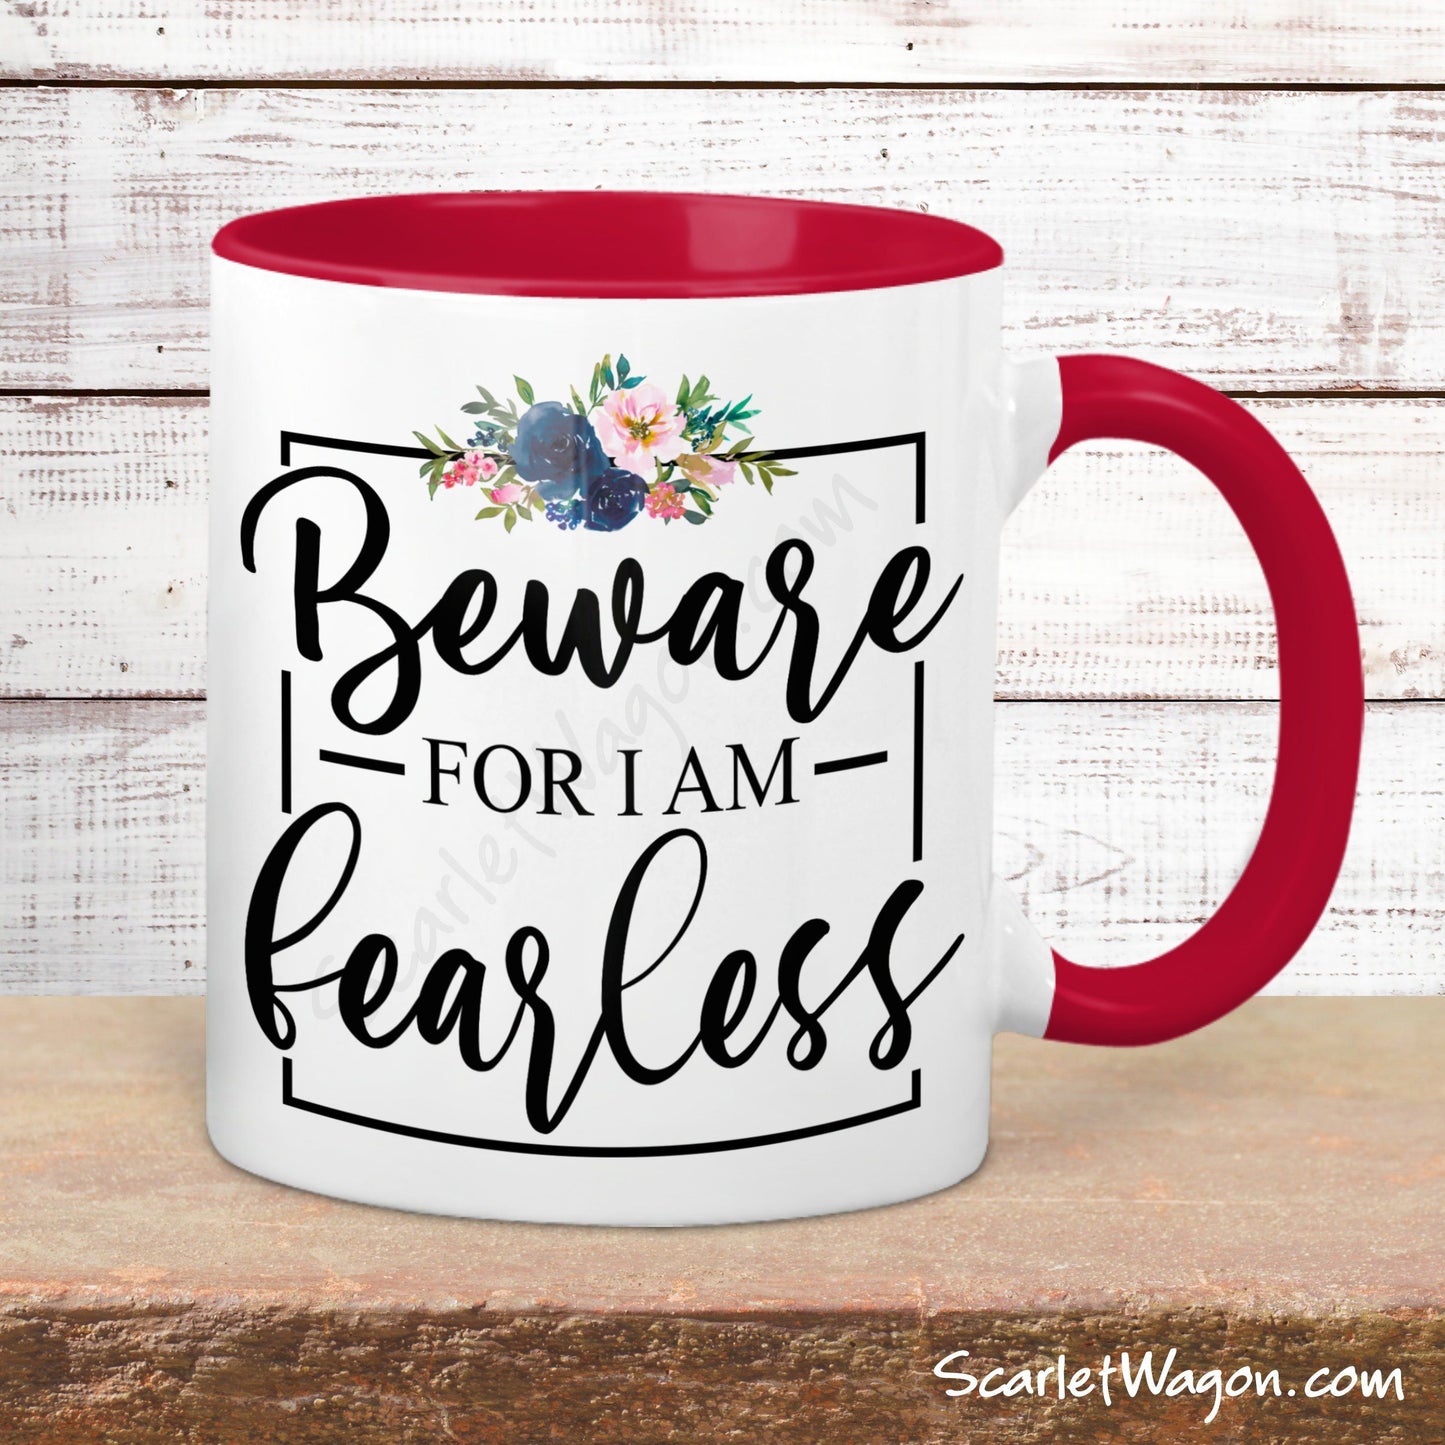 Beware for I am Fearless Coffee Mug mug The Scarlet Wagon Boutique 11 ounce Red 